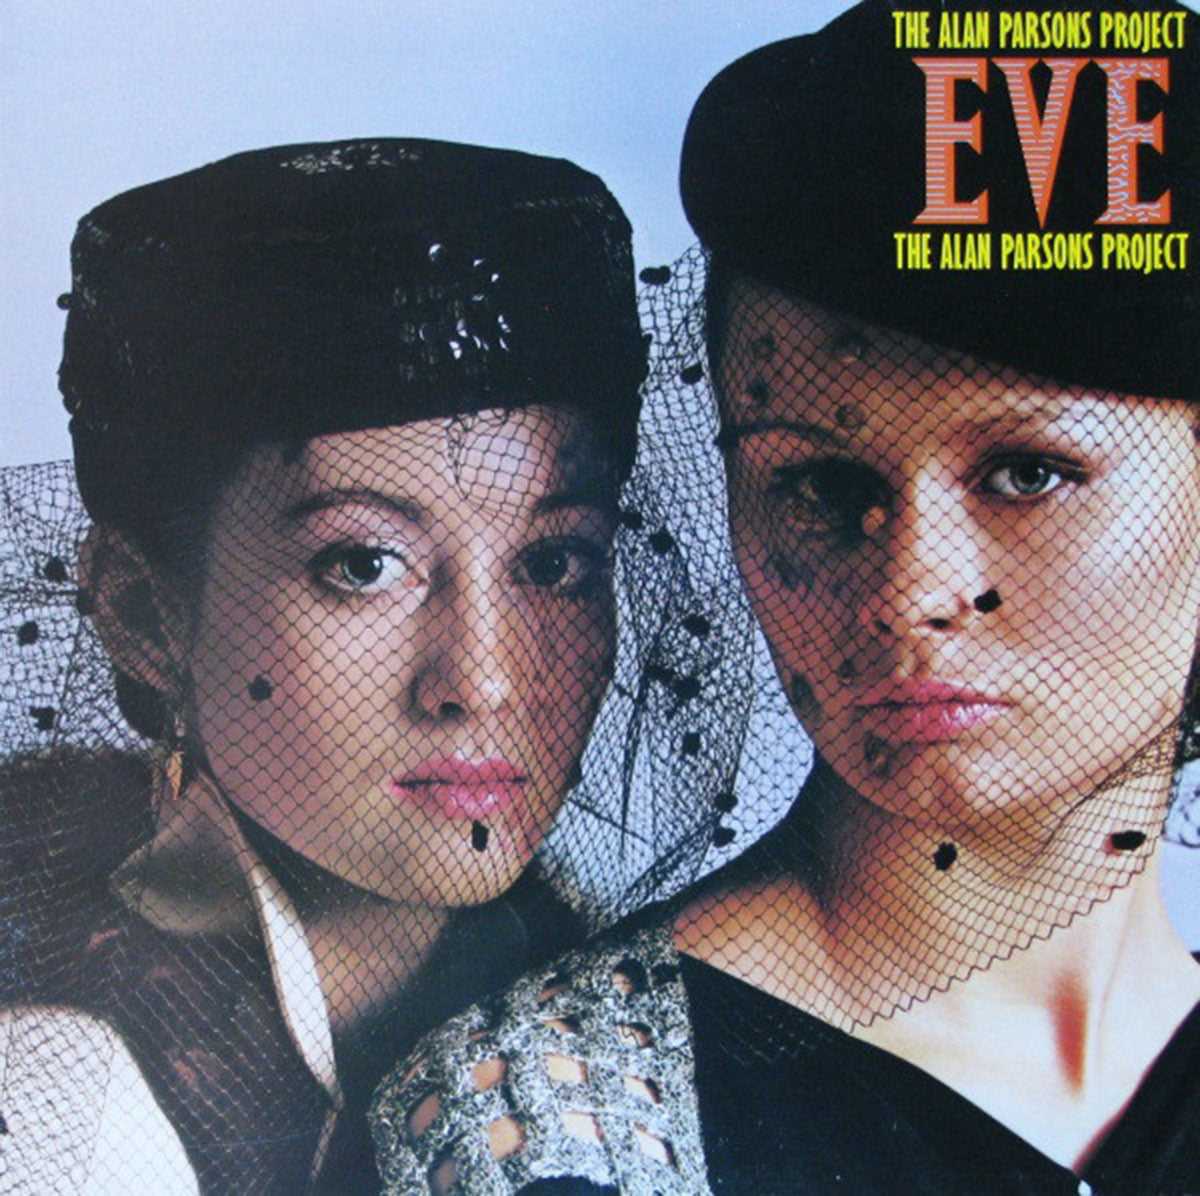 The Alan Parsons Project – Eve - 1979